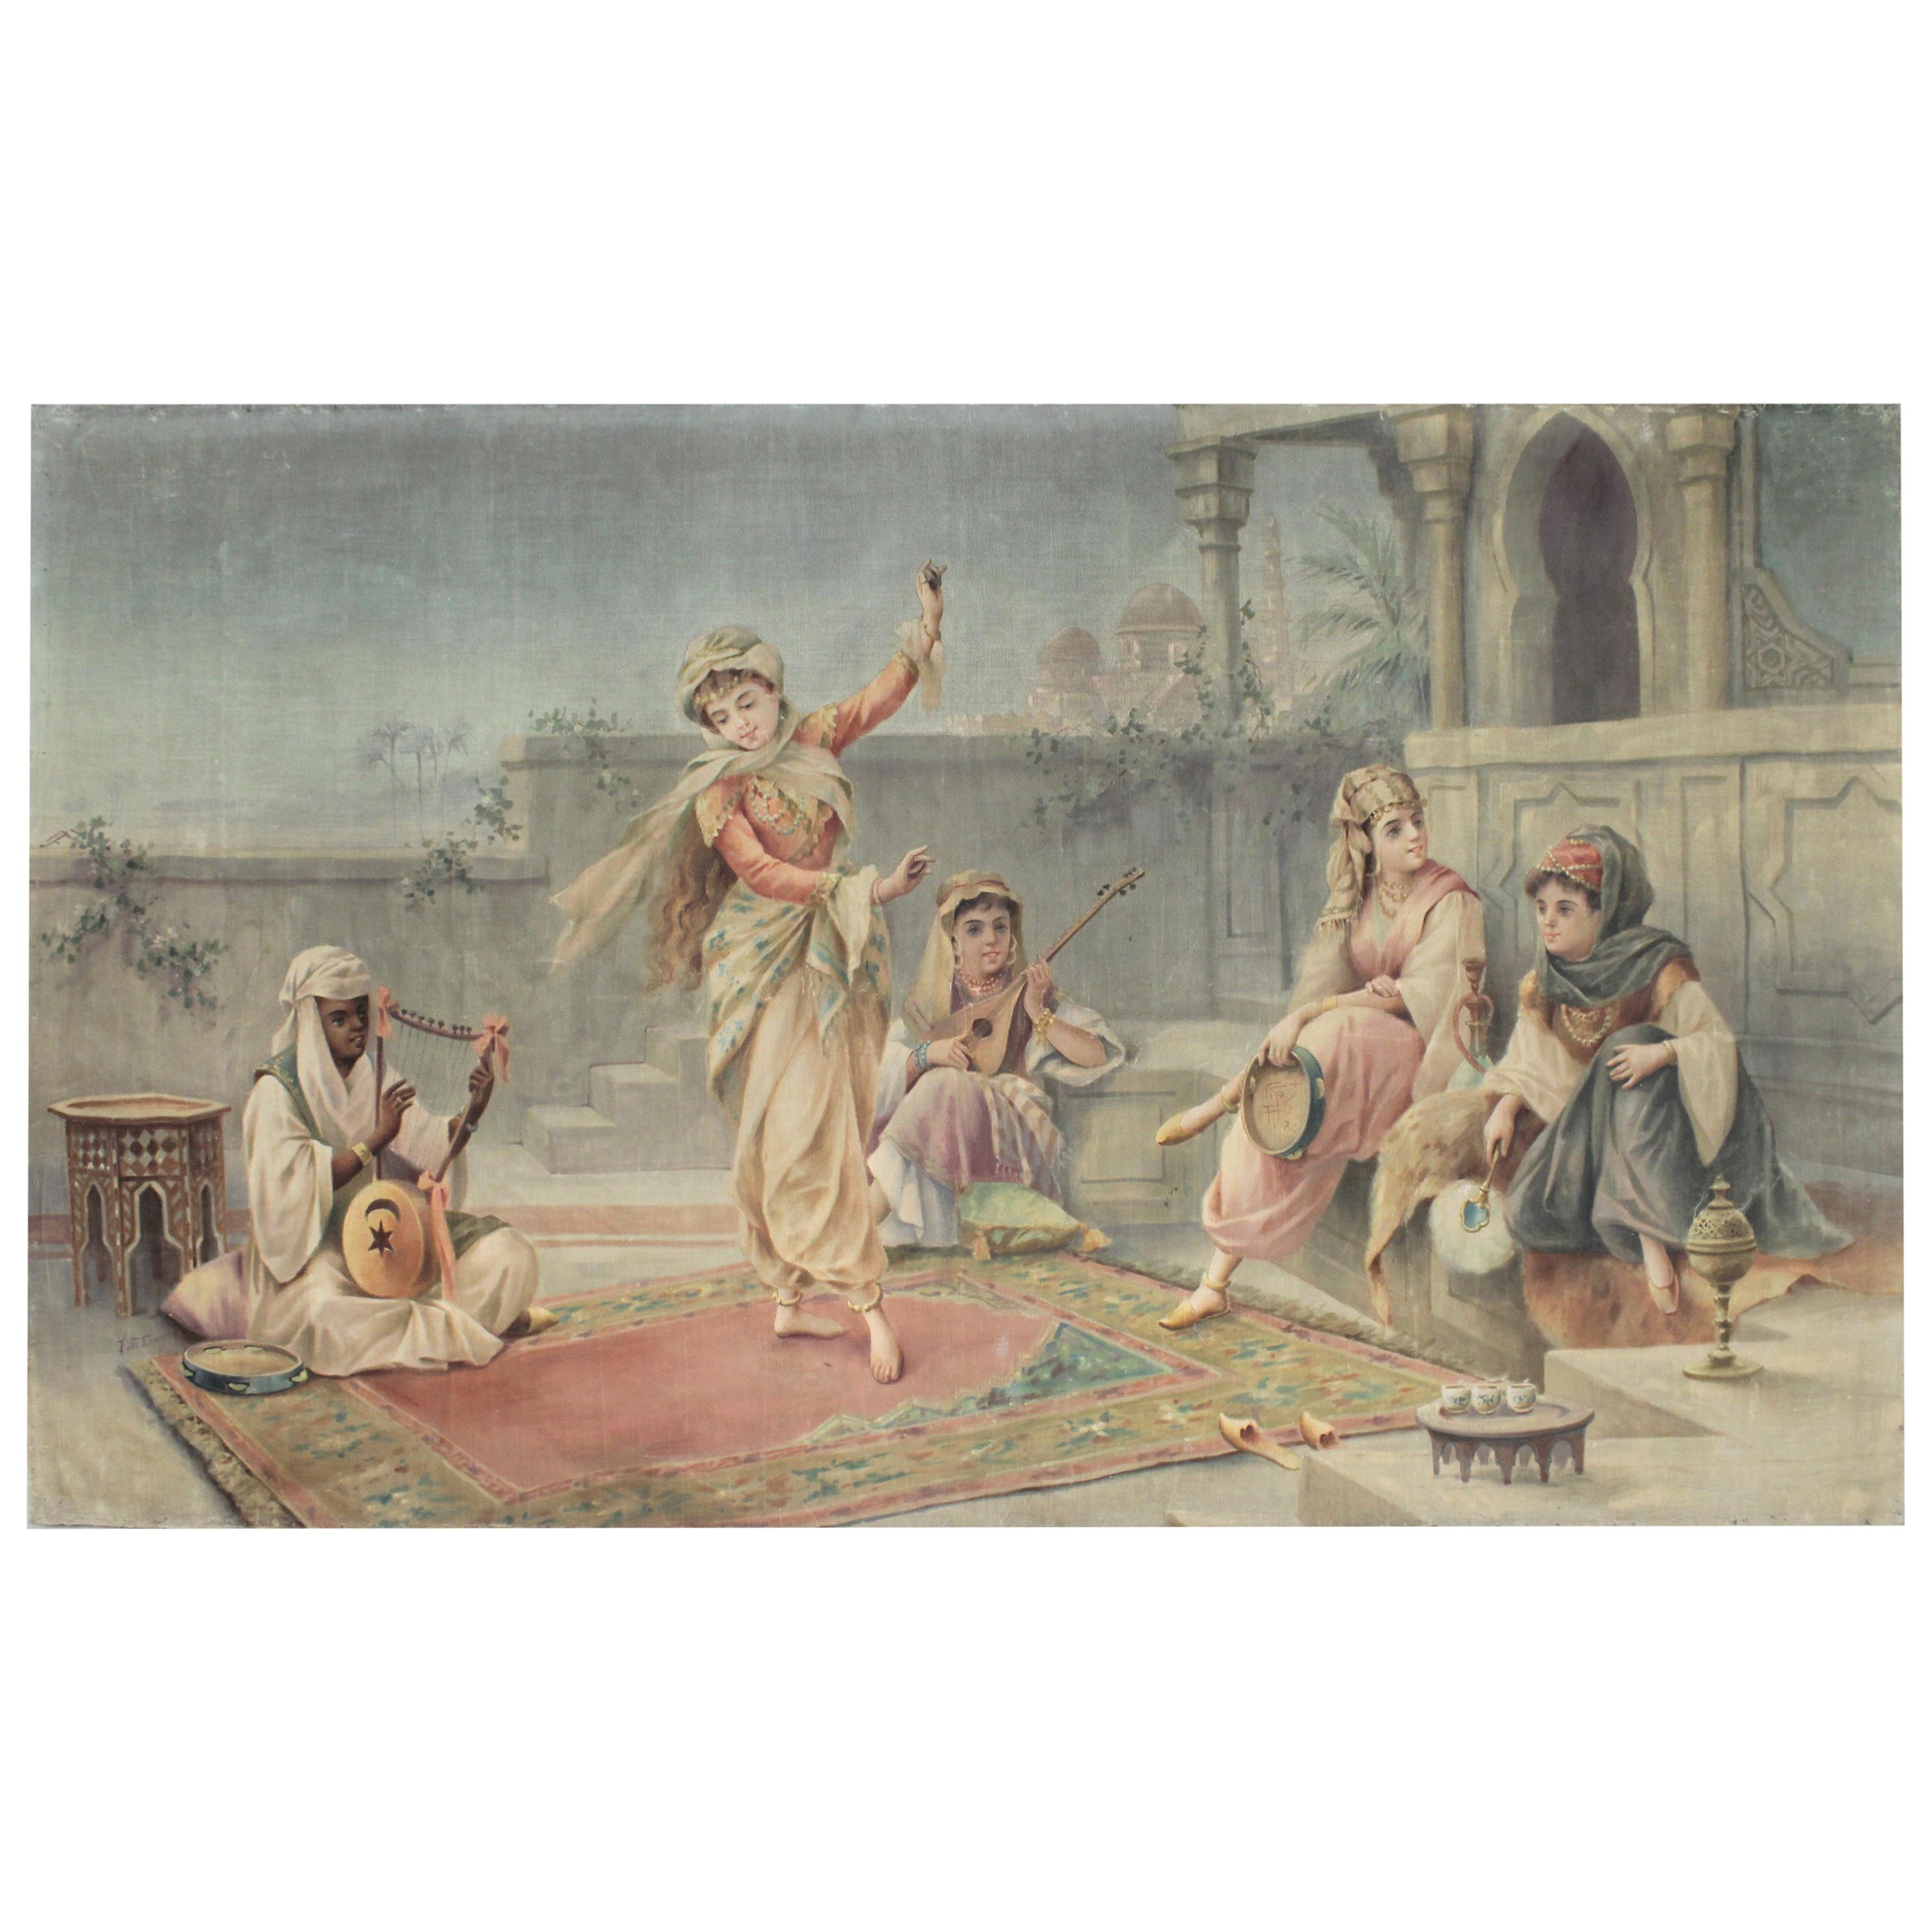 Large Antique Anglo-Indian Painting on Woven Fabric Portraying A Female Dancer